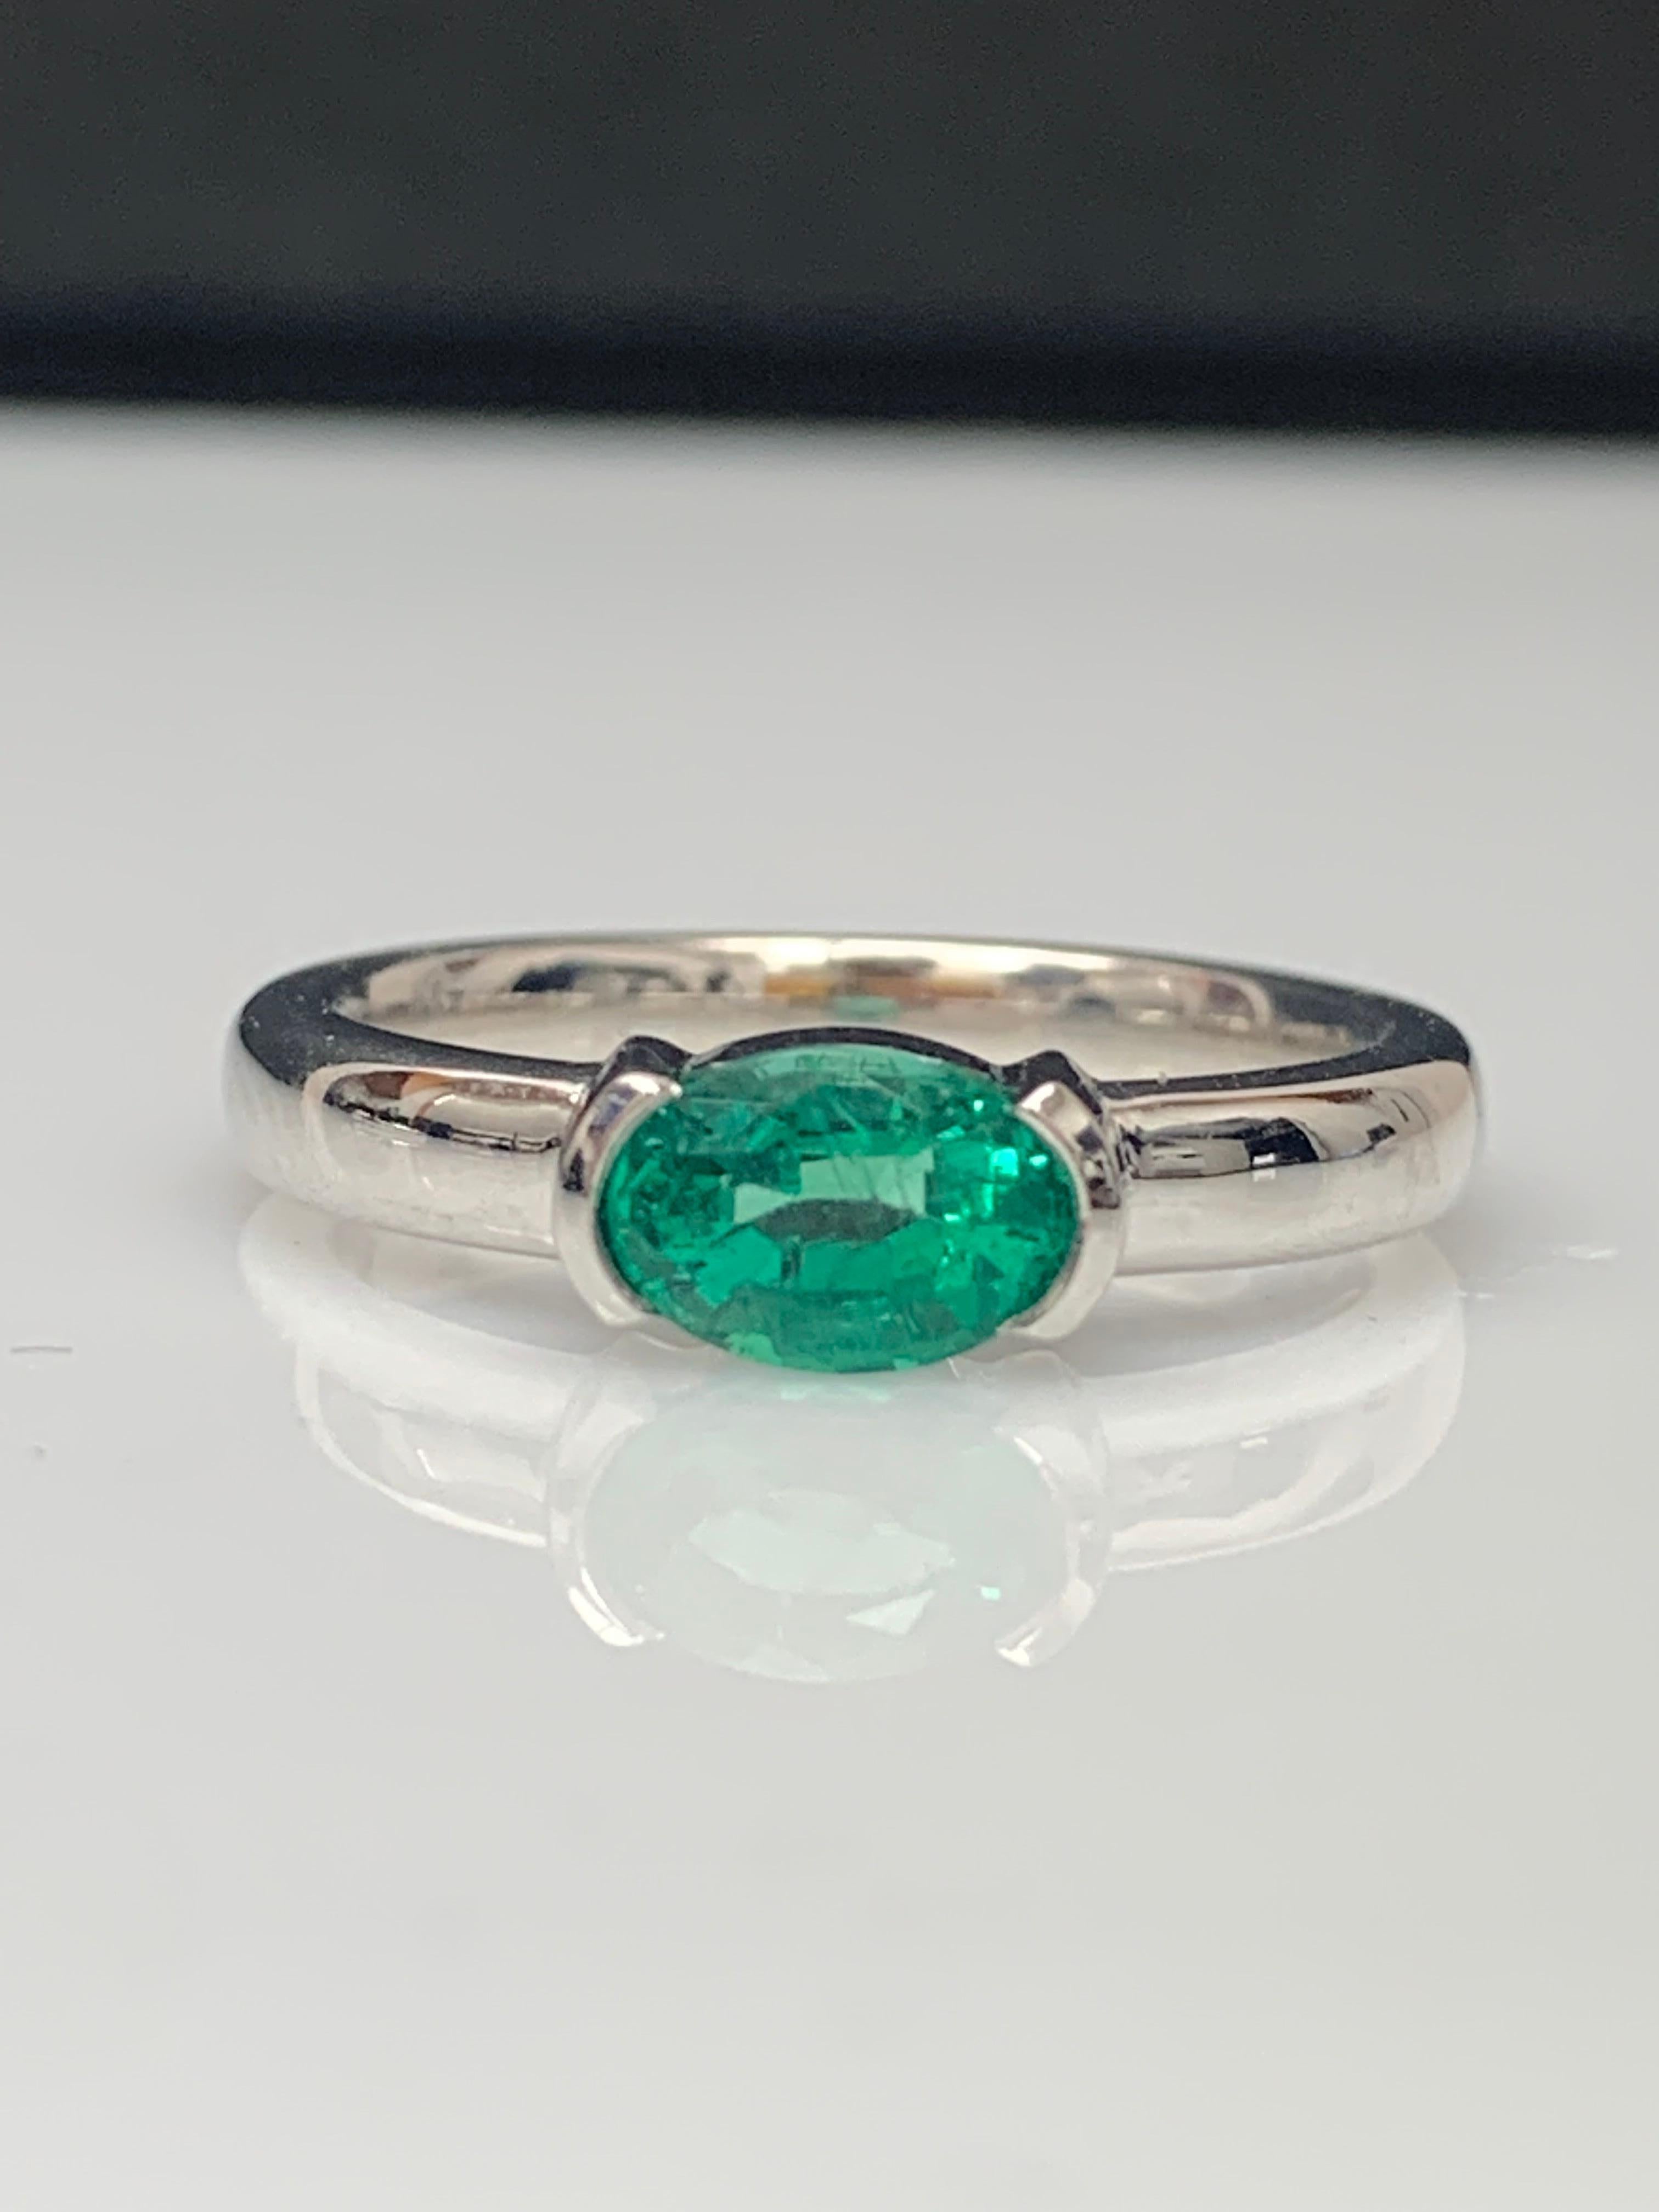 0.77 Carat Oval Cut Emerald Band Ring in 14K White Gold For Sale 5